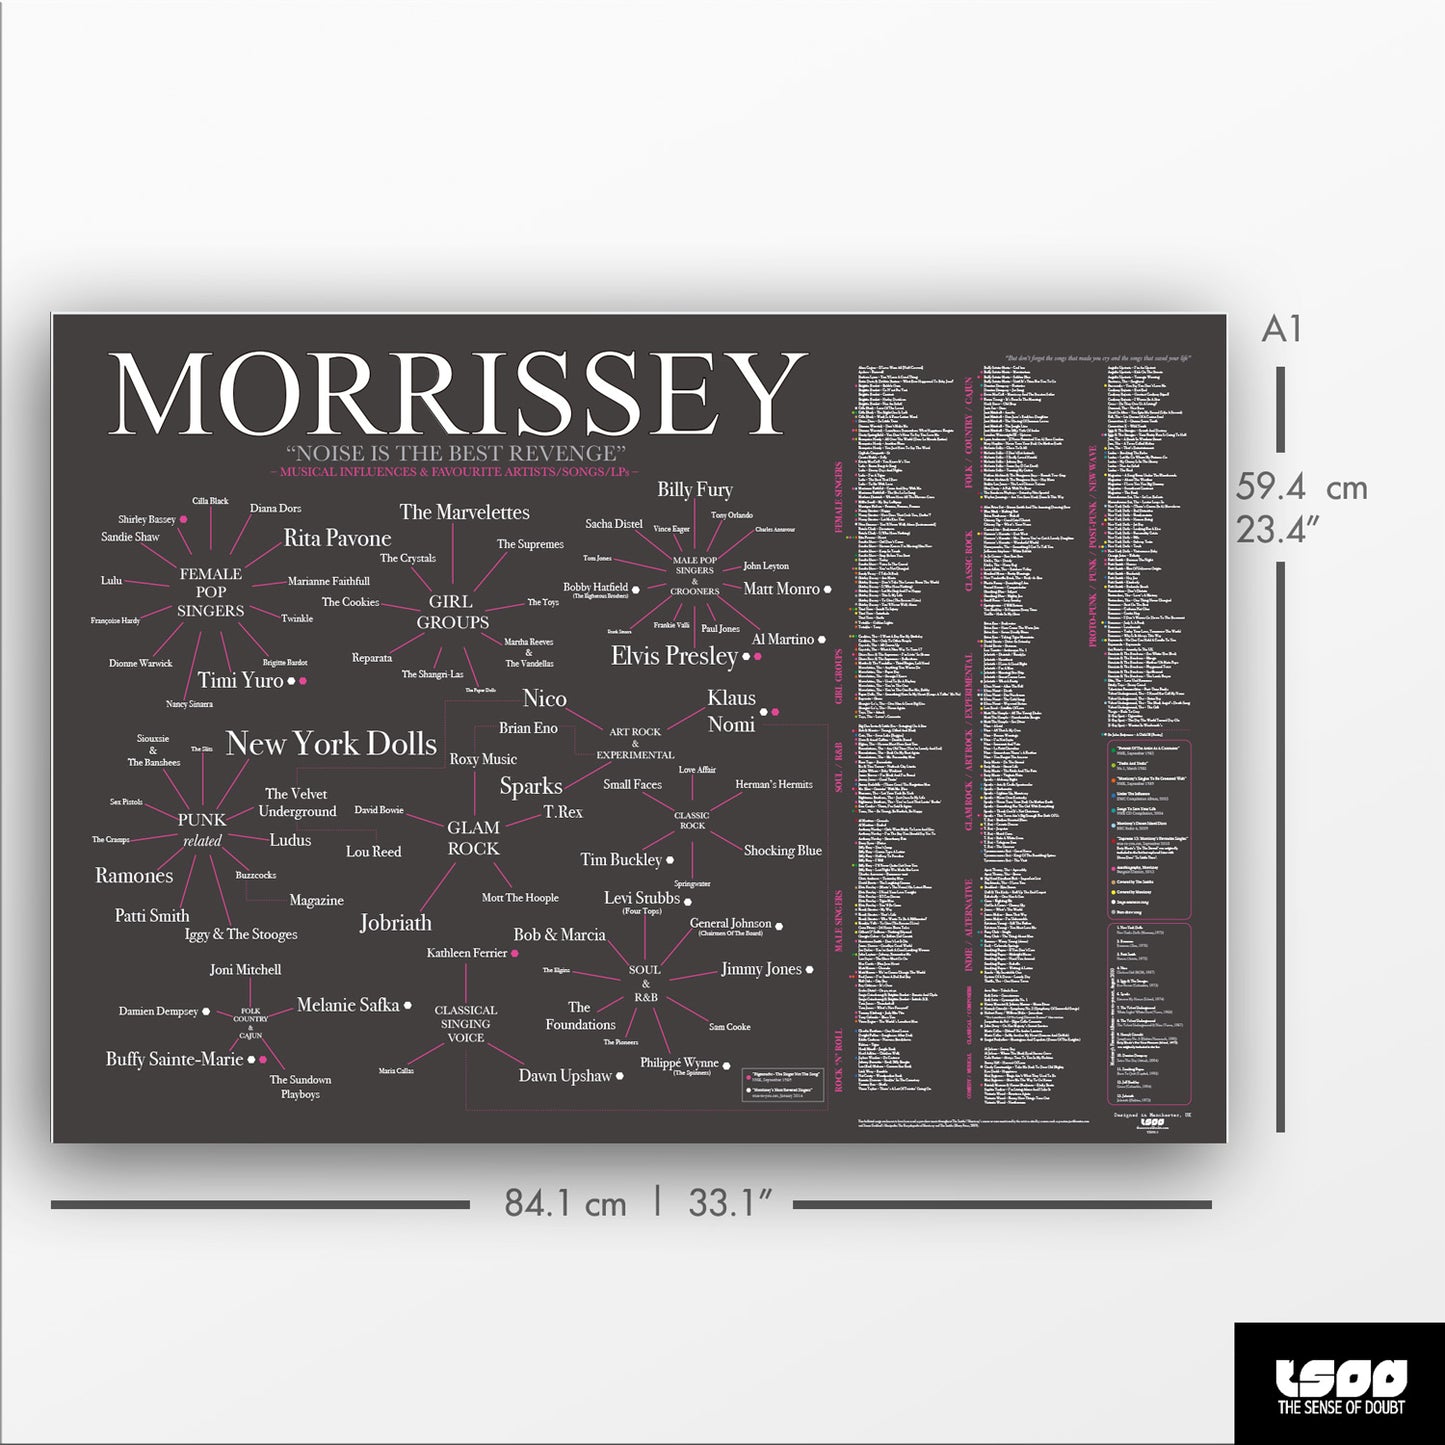 The World of Morrissey: Musical Influences, Favourite Bands, Artists, Songs & LPs